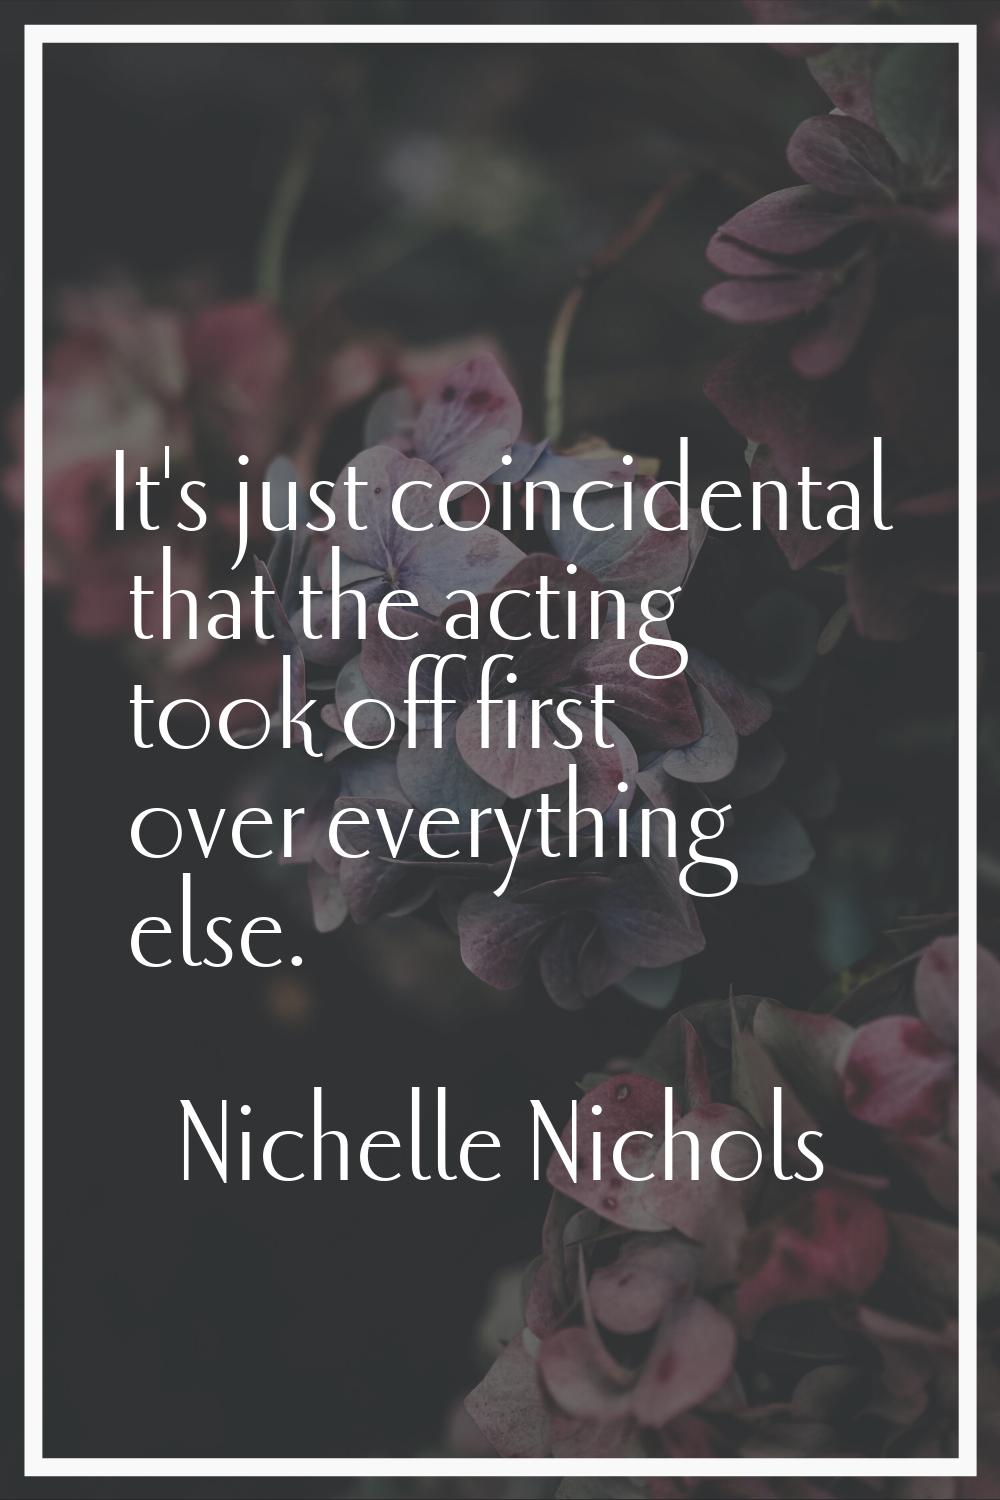 It's just coincidental that the acting took off first over everything else.